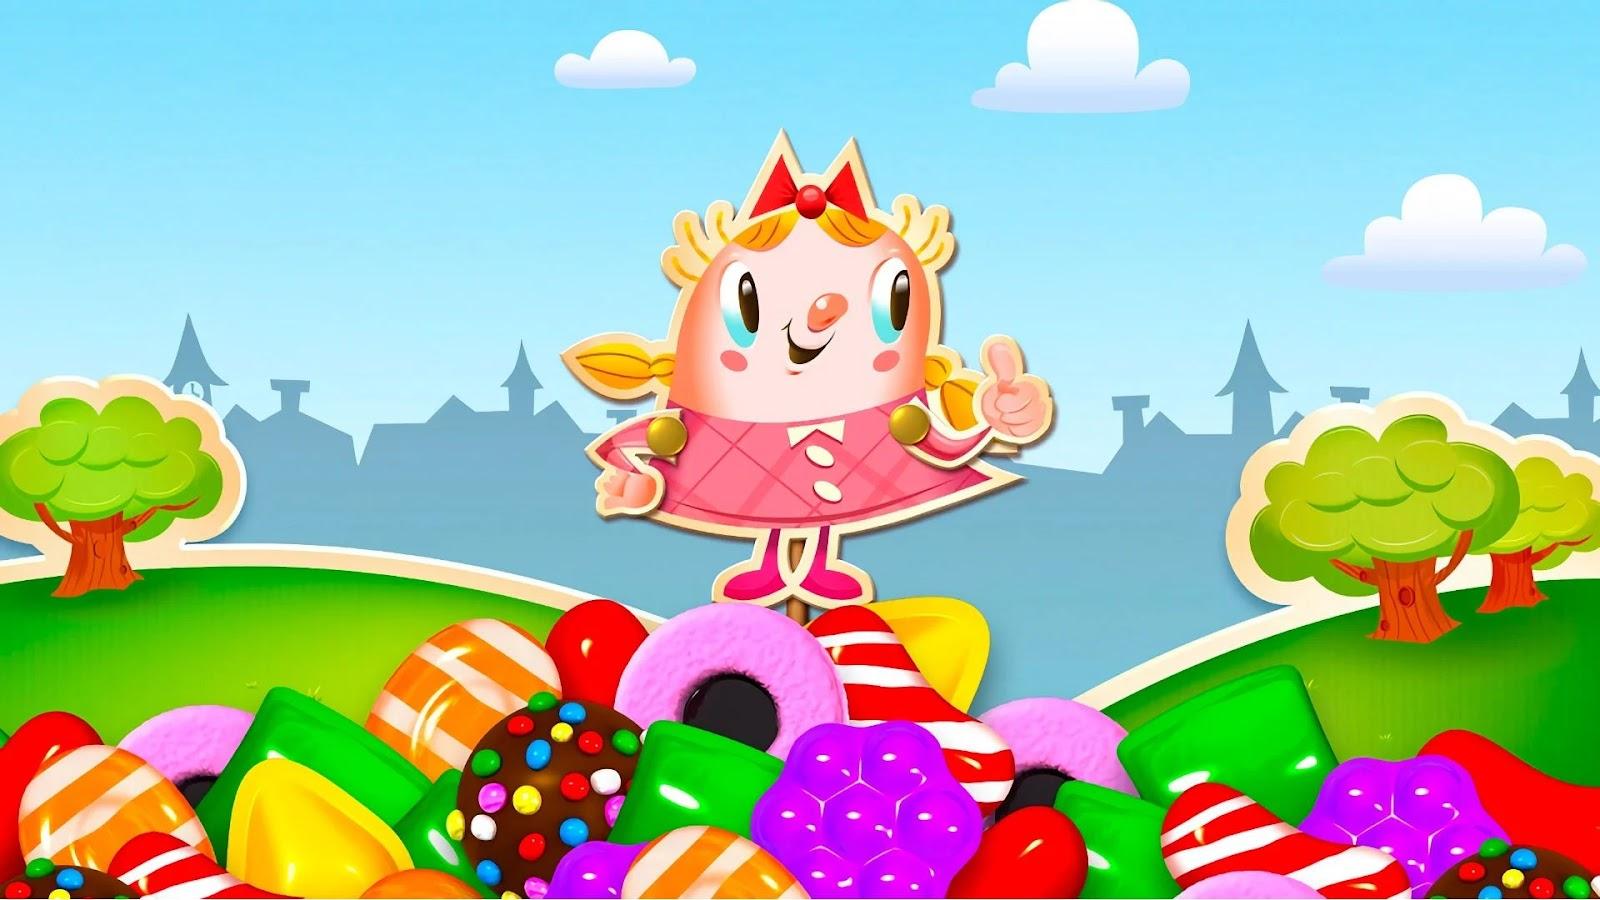 Top Games Like Candy Crush to Make your Matchmaking Desires Fulfilled